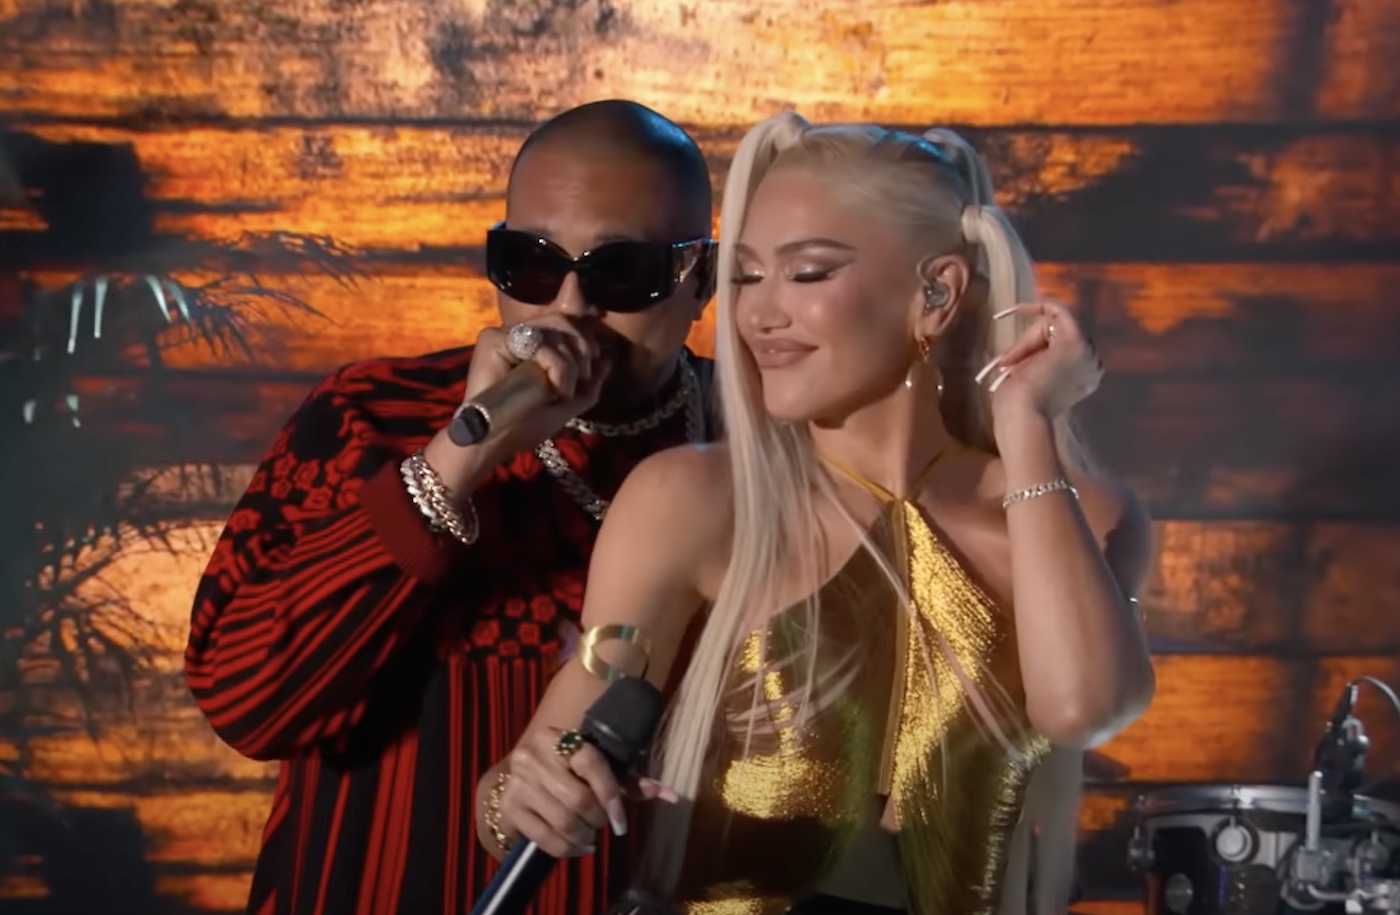 Gwen Stefani accused of cultural appropriation in new Sean Paul video